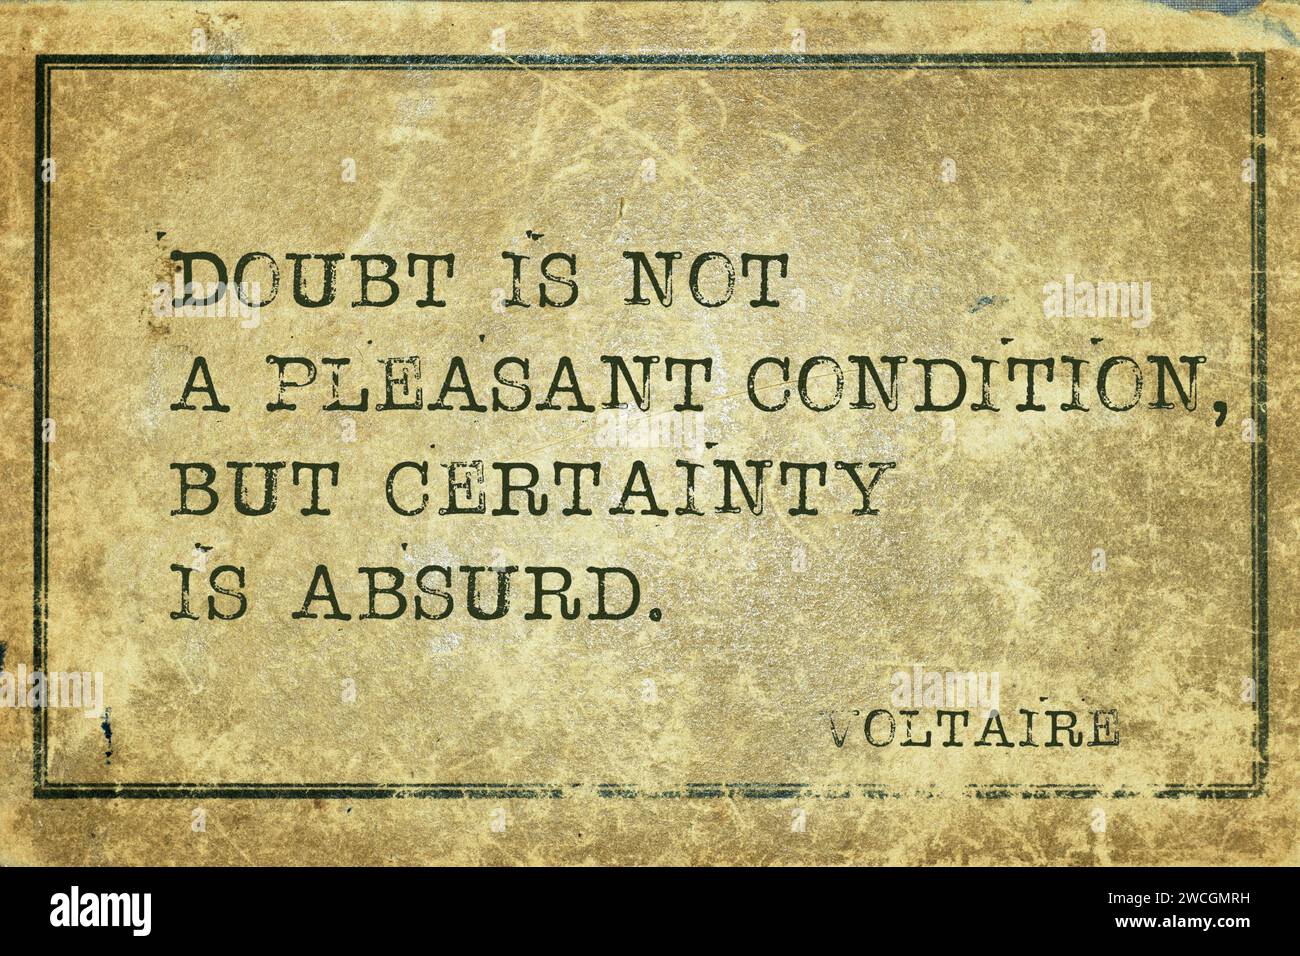 Doubt is not a pleasant condition - ancient French philosopher and writer Voltaire quote printed on grunge vintage cardboard Stock Photo